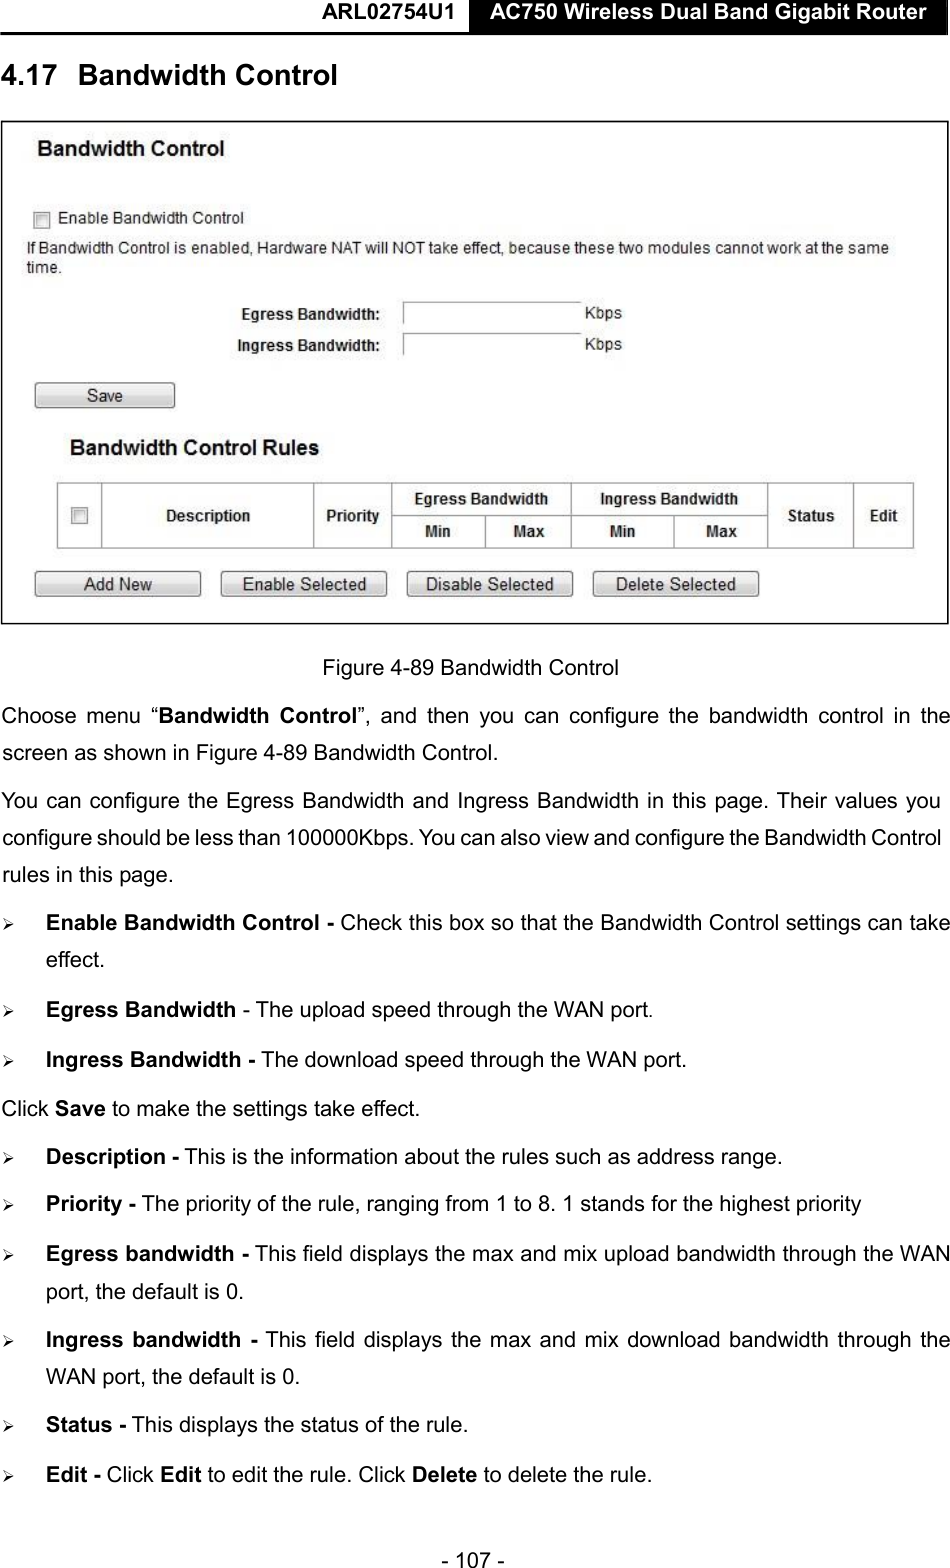  ARL02754U1  AC750 Wireless Dual Band Gigabit Router    - 107 -   Figure 4-89 Bandwidth Control   Choose  menu  “Bandwidth  Control”,  and  then  you  can  configure  the  bandwidth  control  in  the screen as shown in Figure 4-89 Bandwidth Control.   You can configure the Egress Bandwidth and Ingress Bandwidth in this page. Their values you configure should be less than 100000Kbps. You can also view and configure the Bandwidth Control rules in this page.   Enable Bandwidth Control - Check this box so that the Bandwidth Control settings can take effect.   Egress Bandwidth - The upload speed through the WAN port.   Ingress Bandwidth - The download speed through the WAN port.  Click Save to make the settings take effect.   Description - This is the information about the rules such as address range.   Priority - The priority of the rule, ranging from 1 to 8. 1 stands for the highest priority   Egress bandwidth - This field displays the max and mix upload bandwidth through the WAN port, the default is 0.   Ingress bandwidth - This field displays the max and mix download bandwidth through the WAN port, the default is 0.   Status - This displays the status of the rule.   Edit - Click Edit to edit the rule. Click Delete to delete the rule.  4.17   Bandwidth Control    